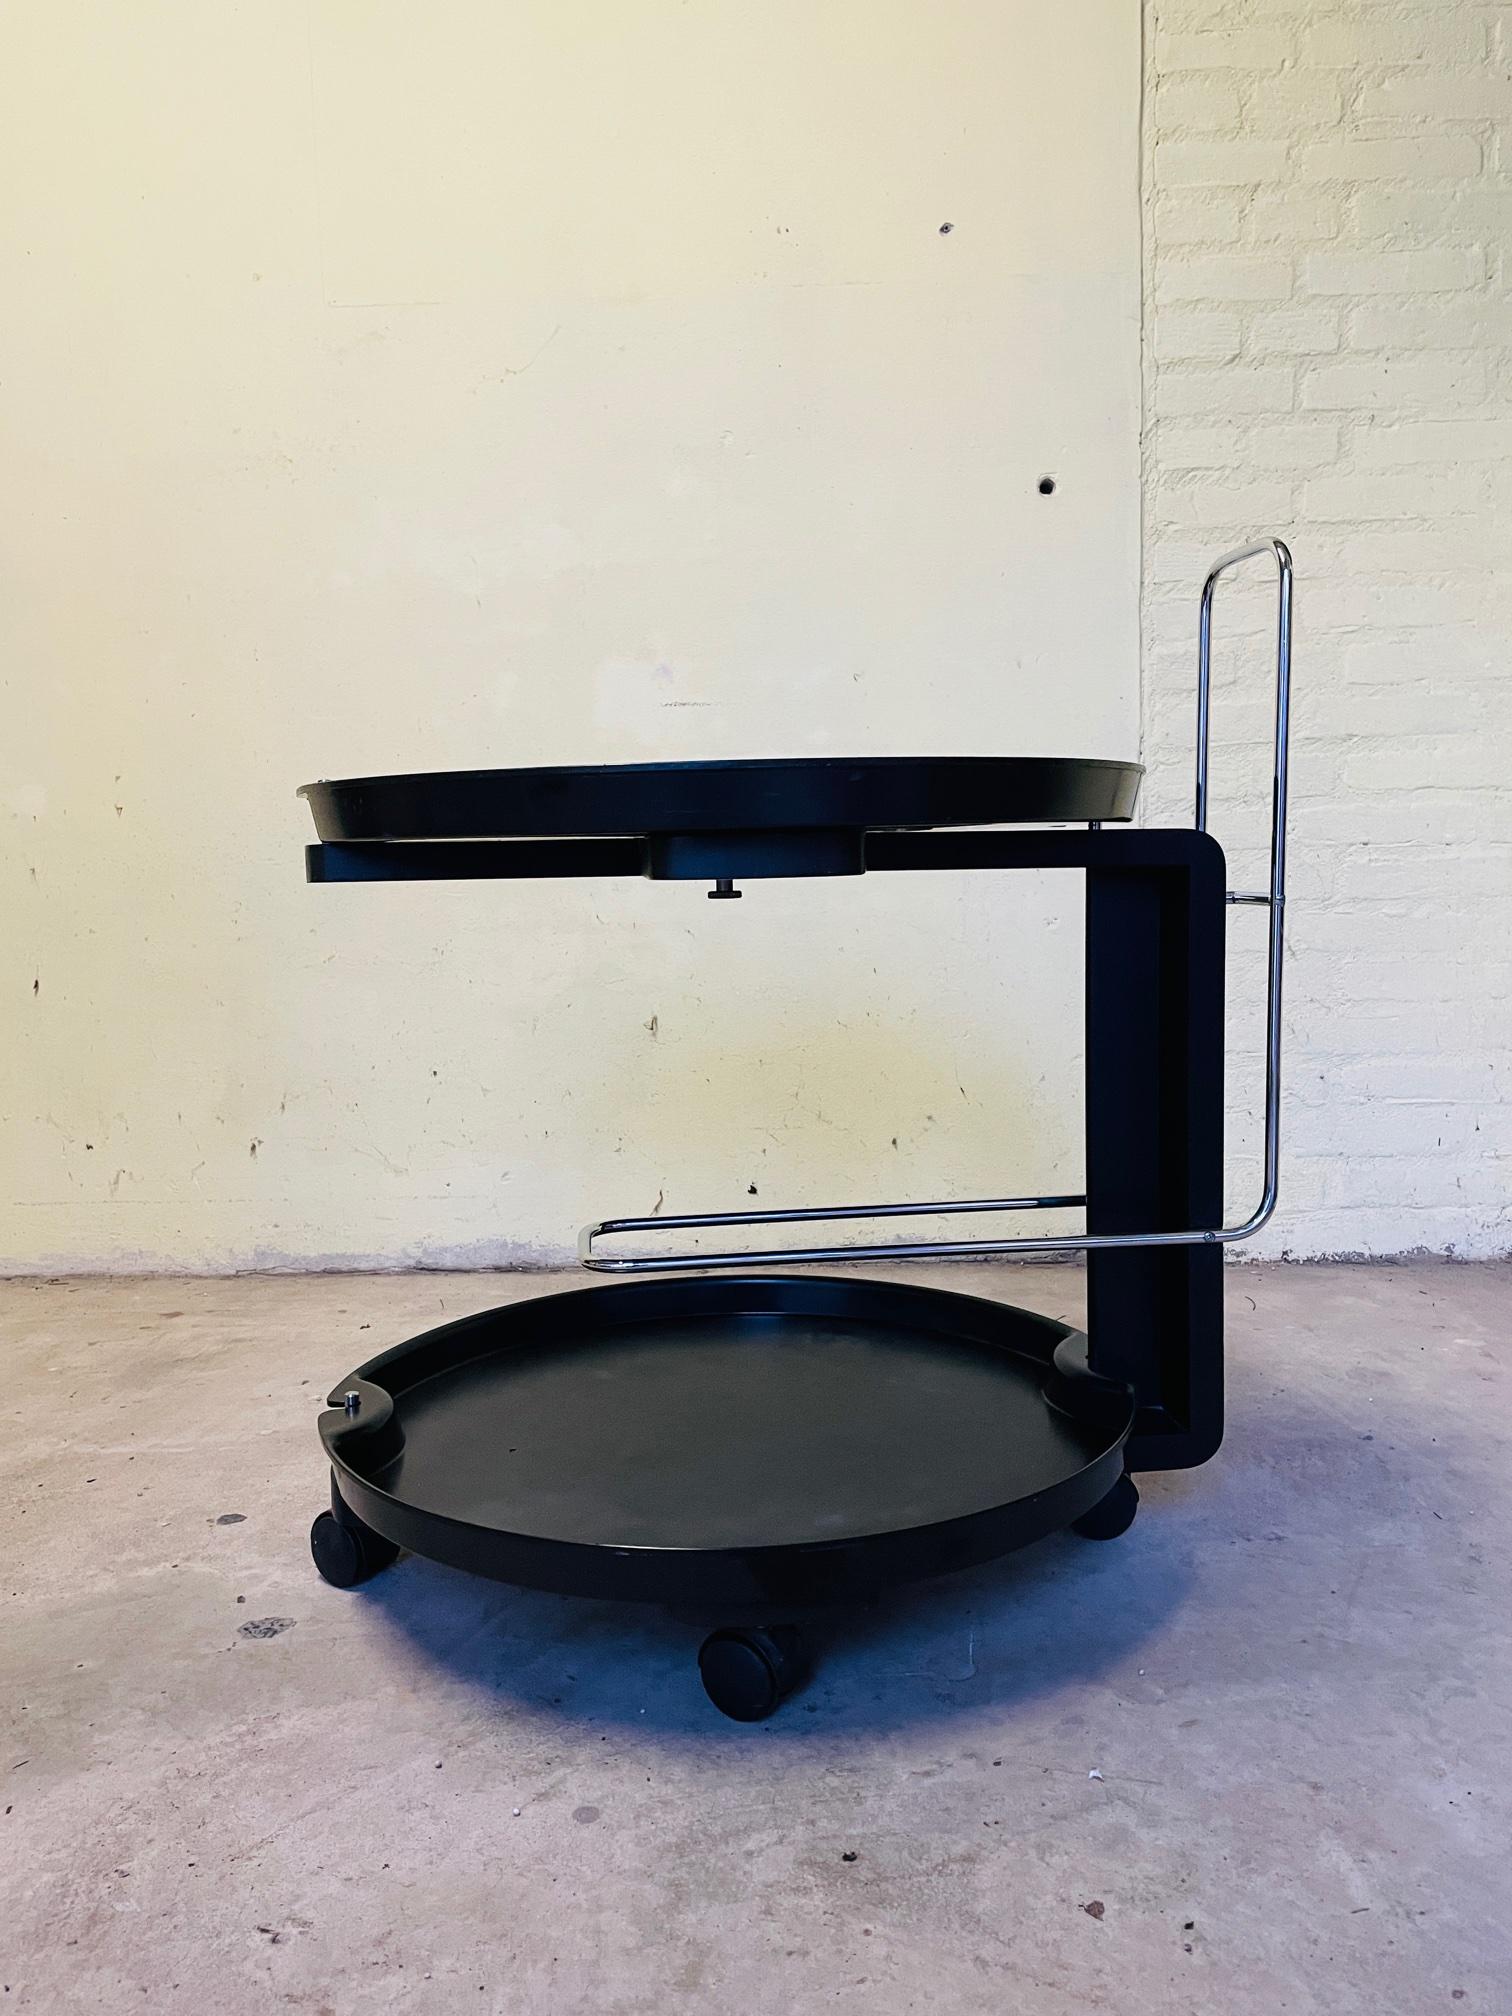 Service trolley 1980s Rosenthal by Waldemar Rothe.
Elegant Service bar Cart designed by Waldemar Rothe for Rosenthal, Germany.

The beautiful designed cart has a special holder which fits three bottles and two removable trays which can be used to